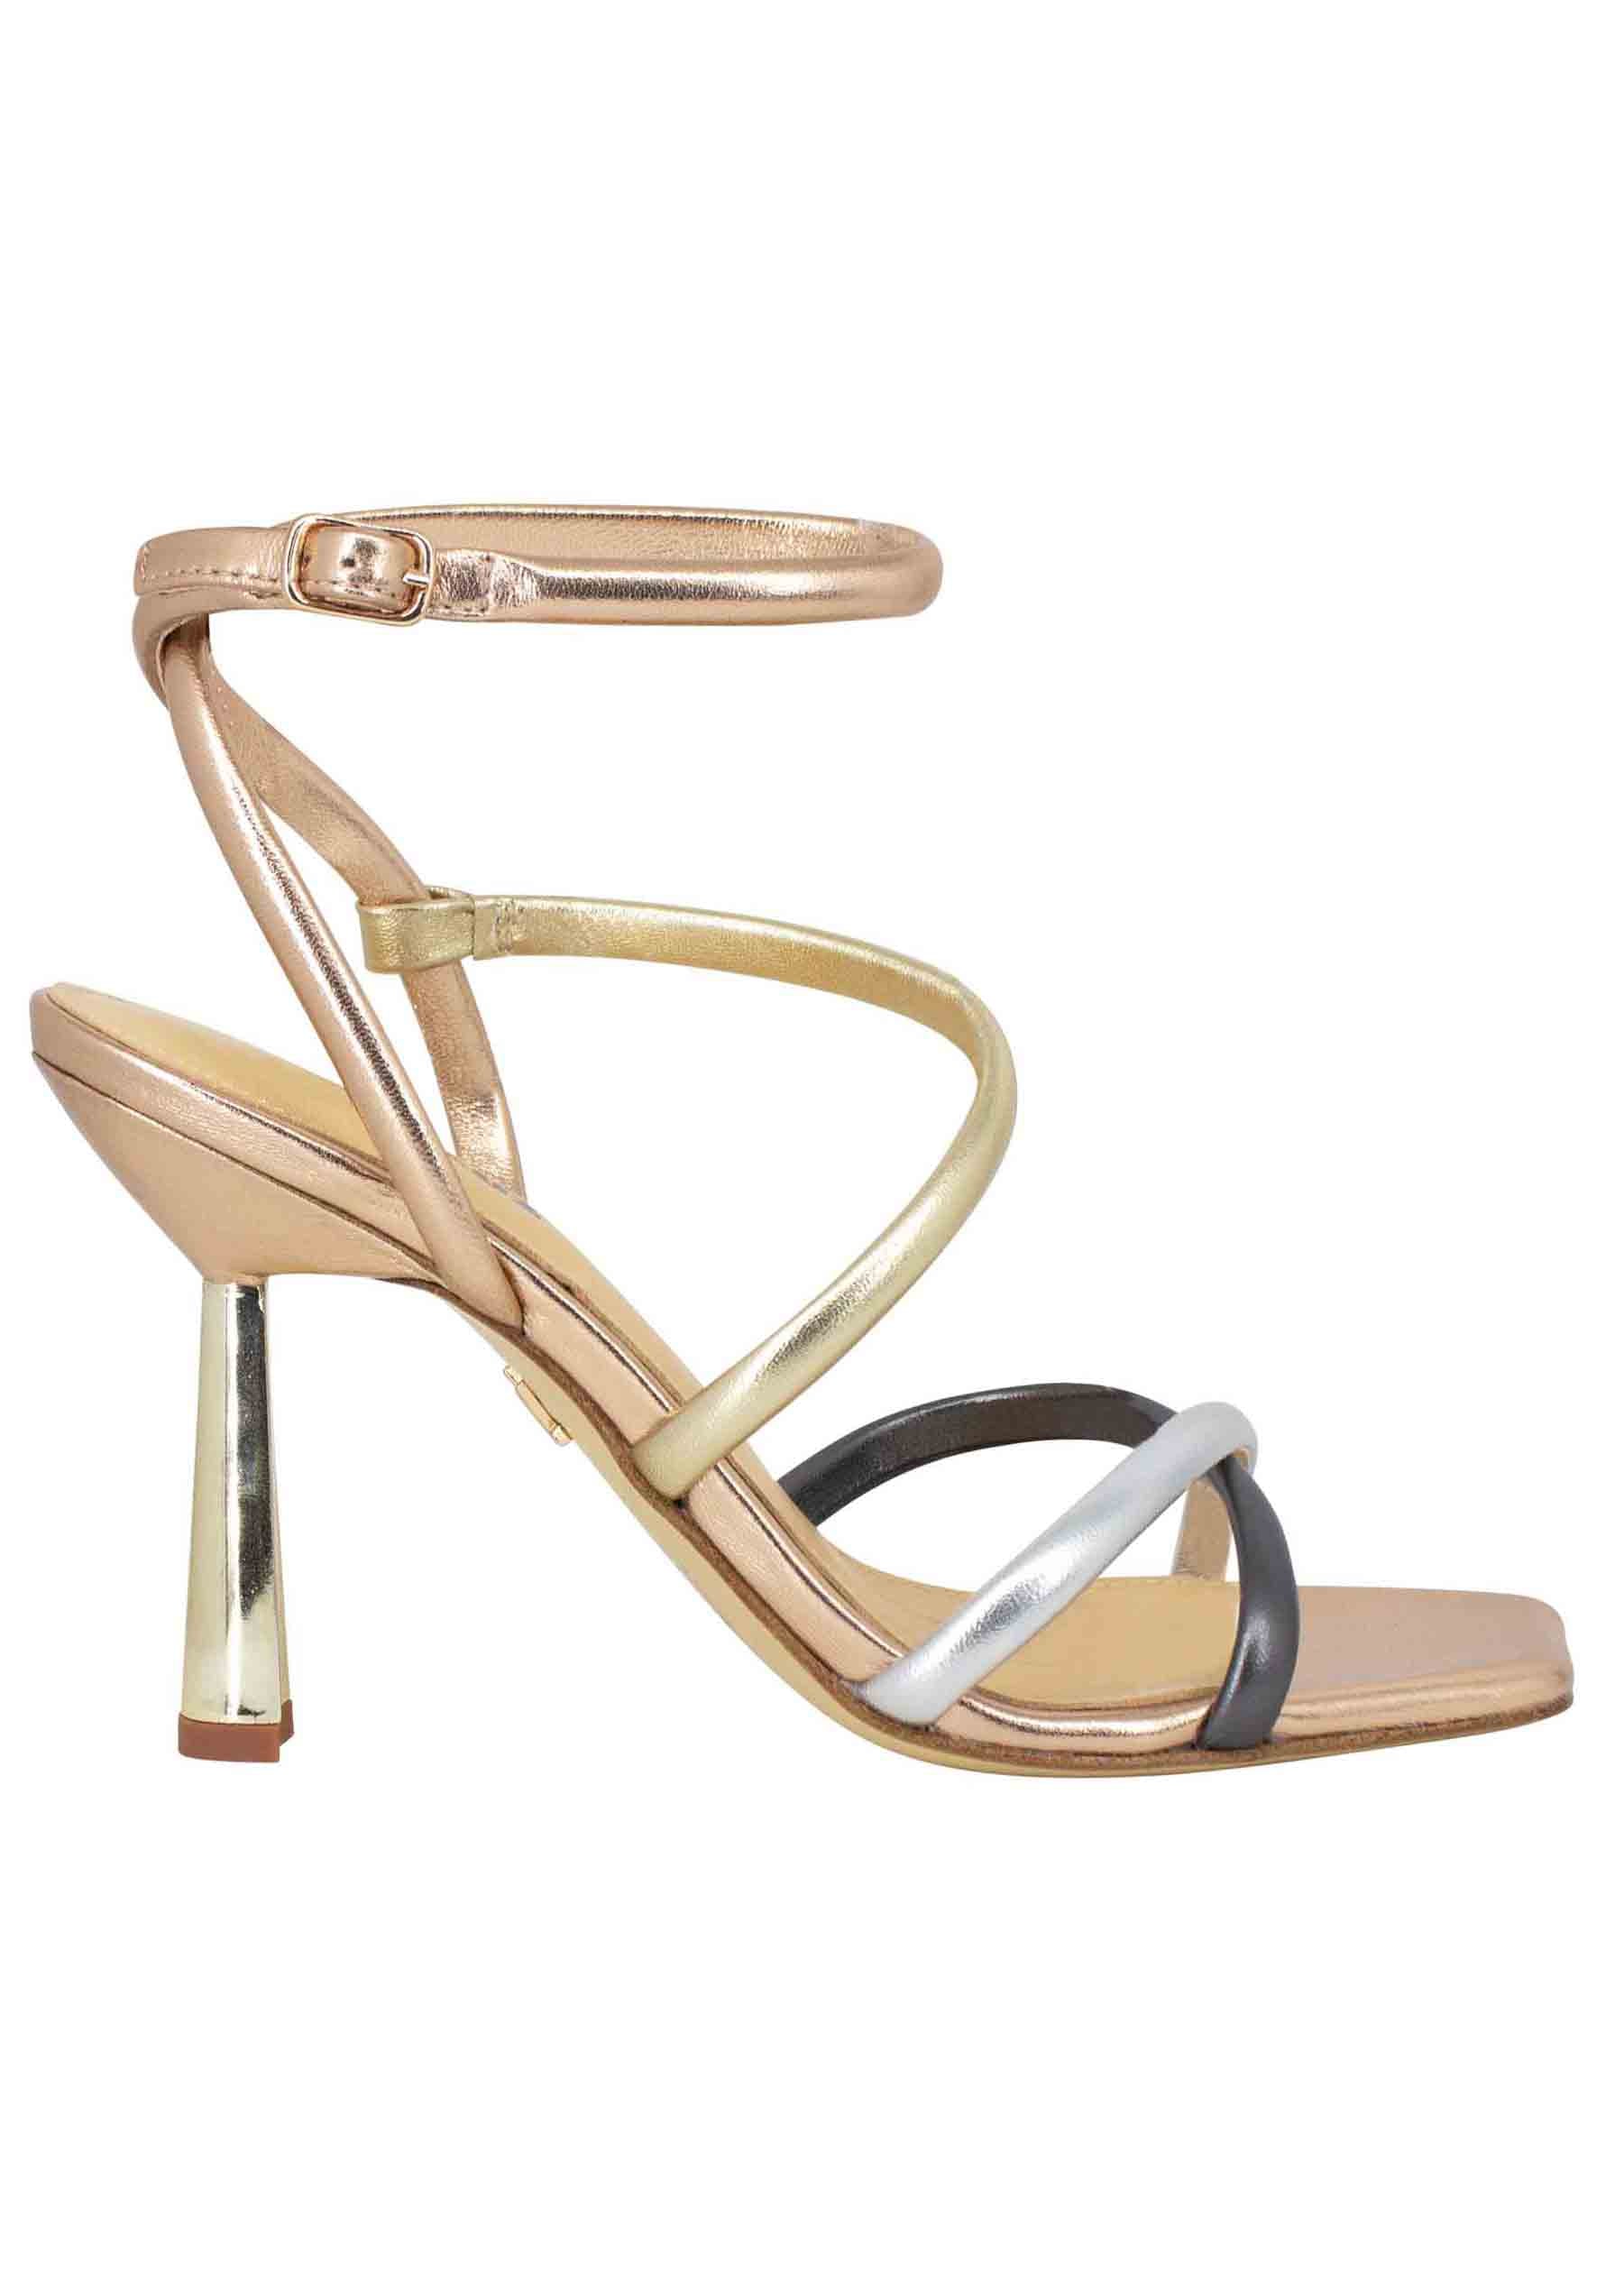 Piemonte Women's sandals in copper laminated leather with high heel and square toe